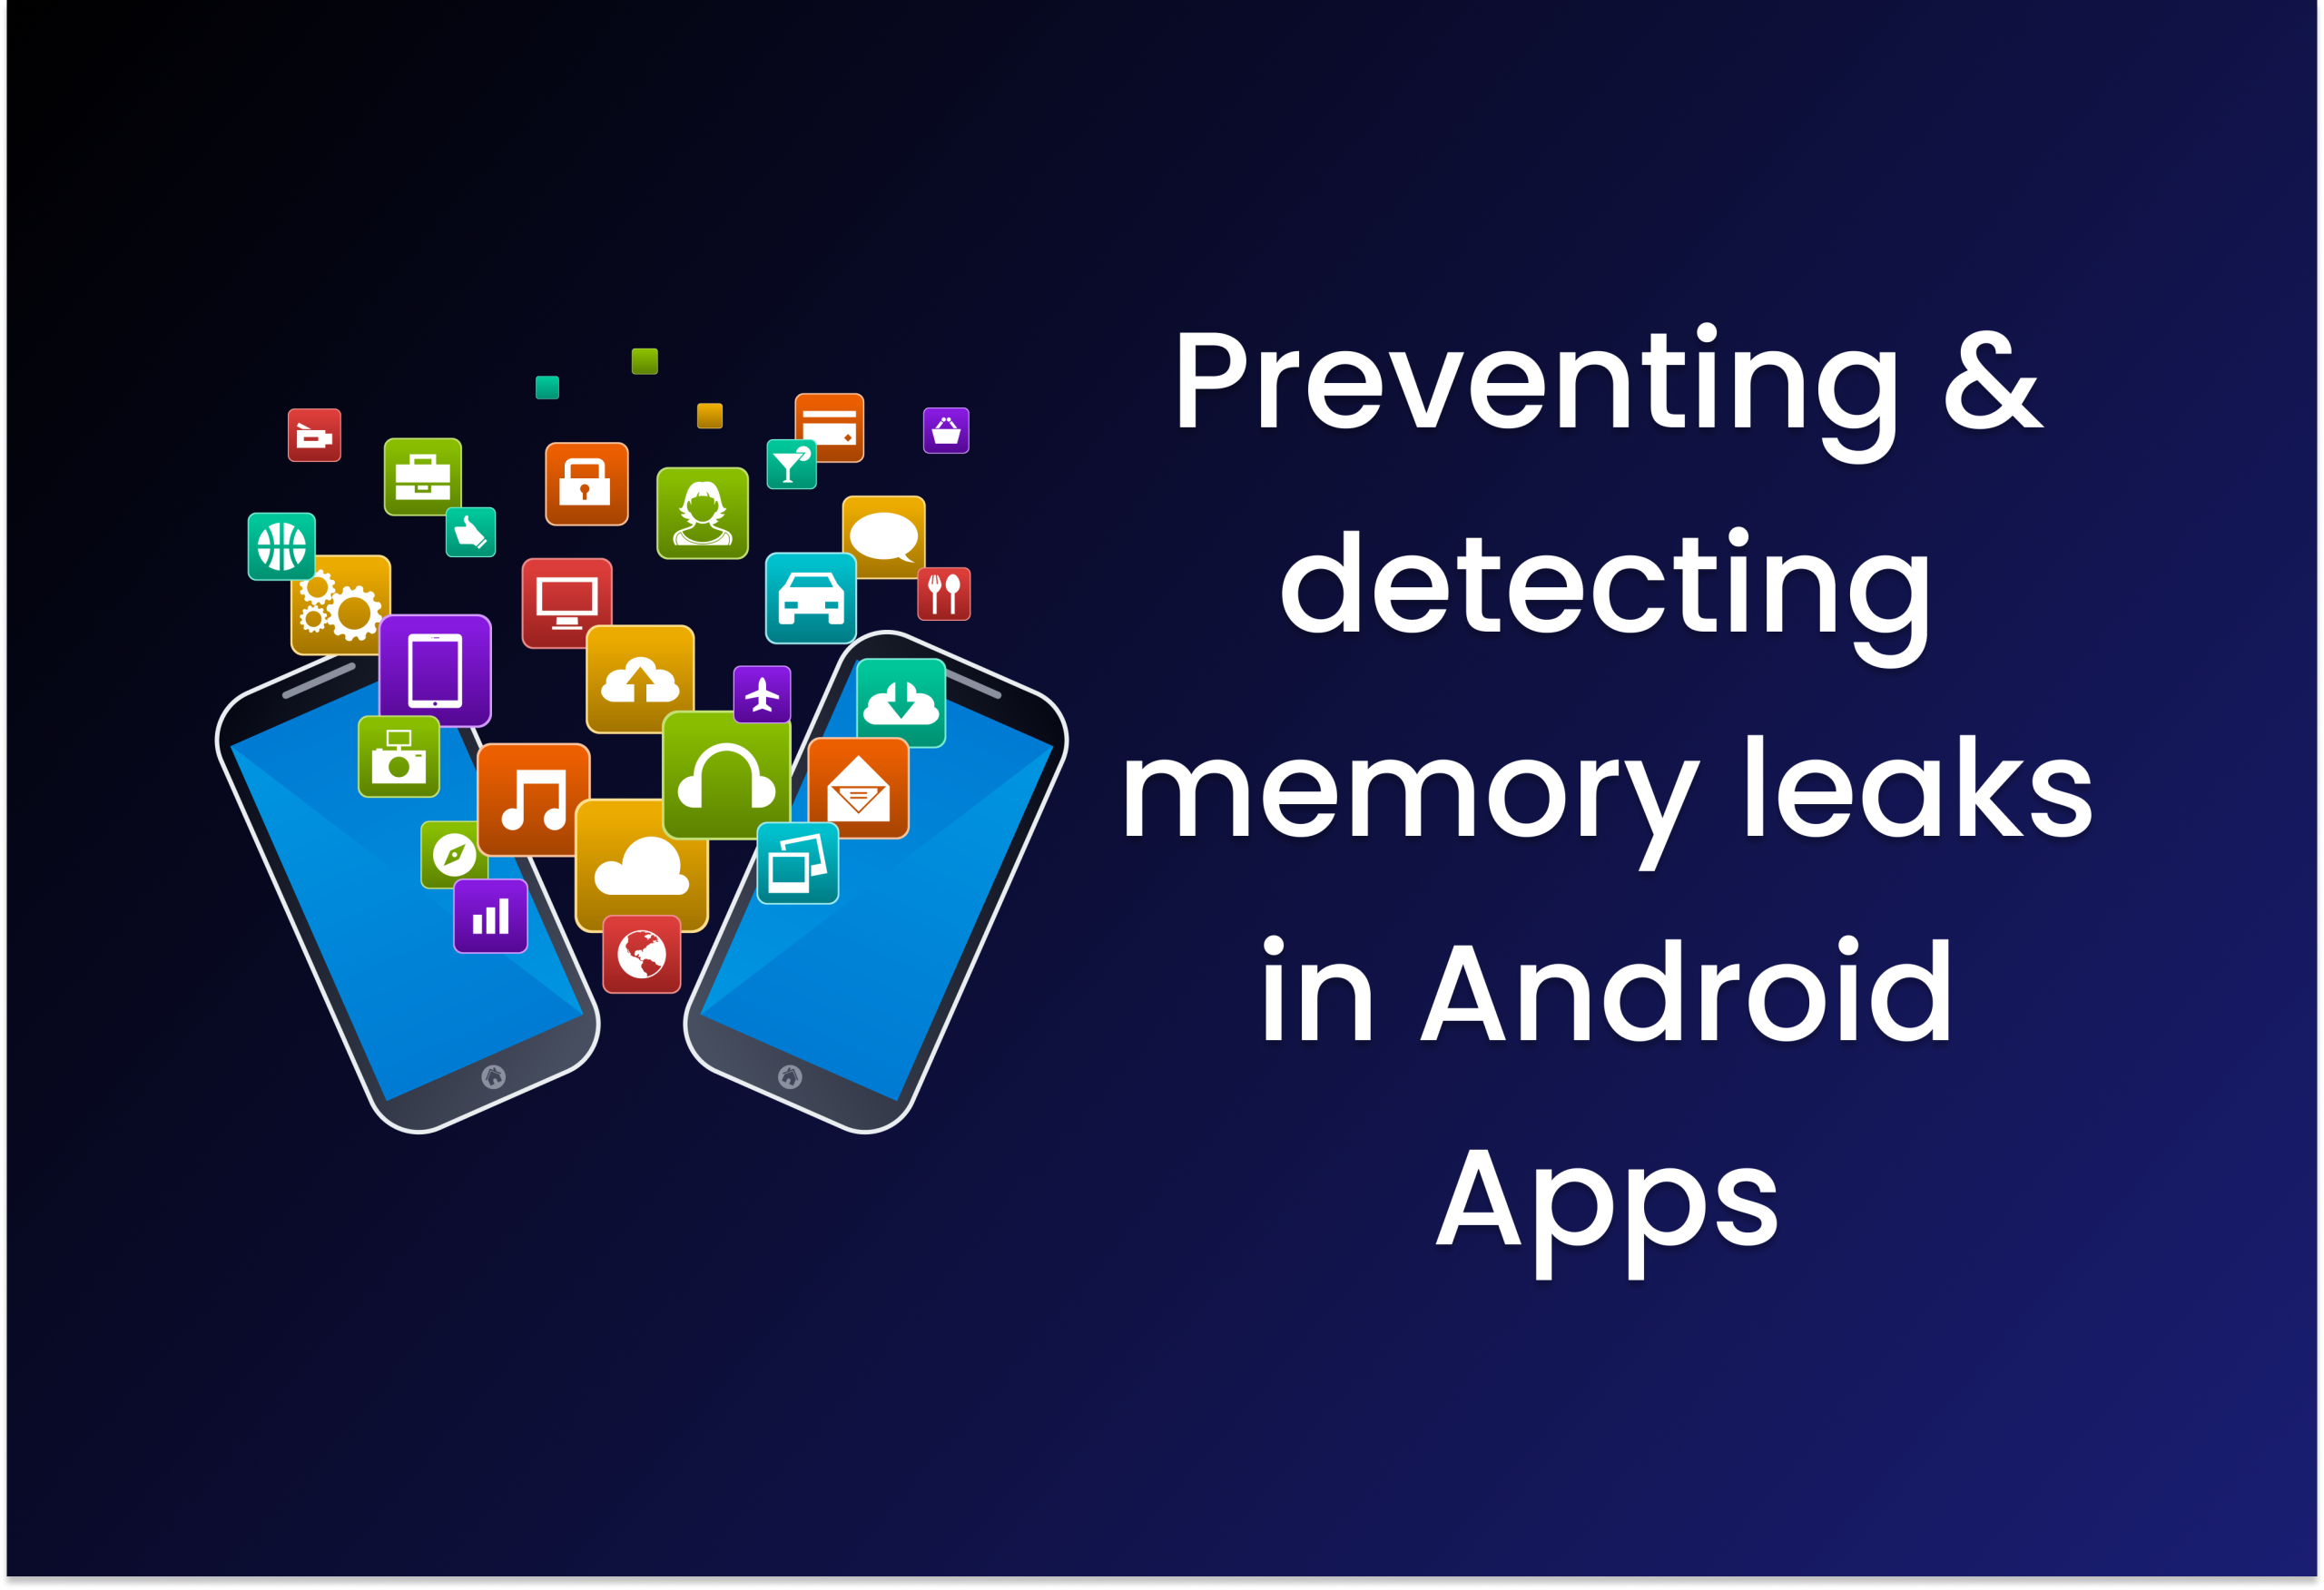 Preventing & detecting memory leaks in Android Apps